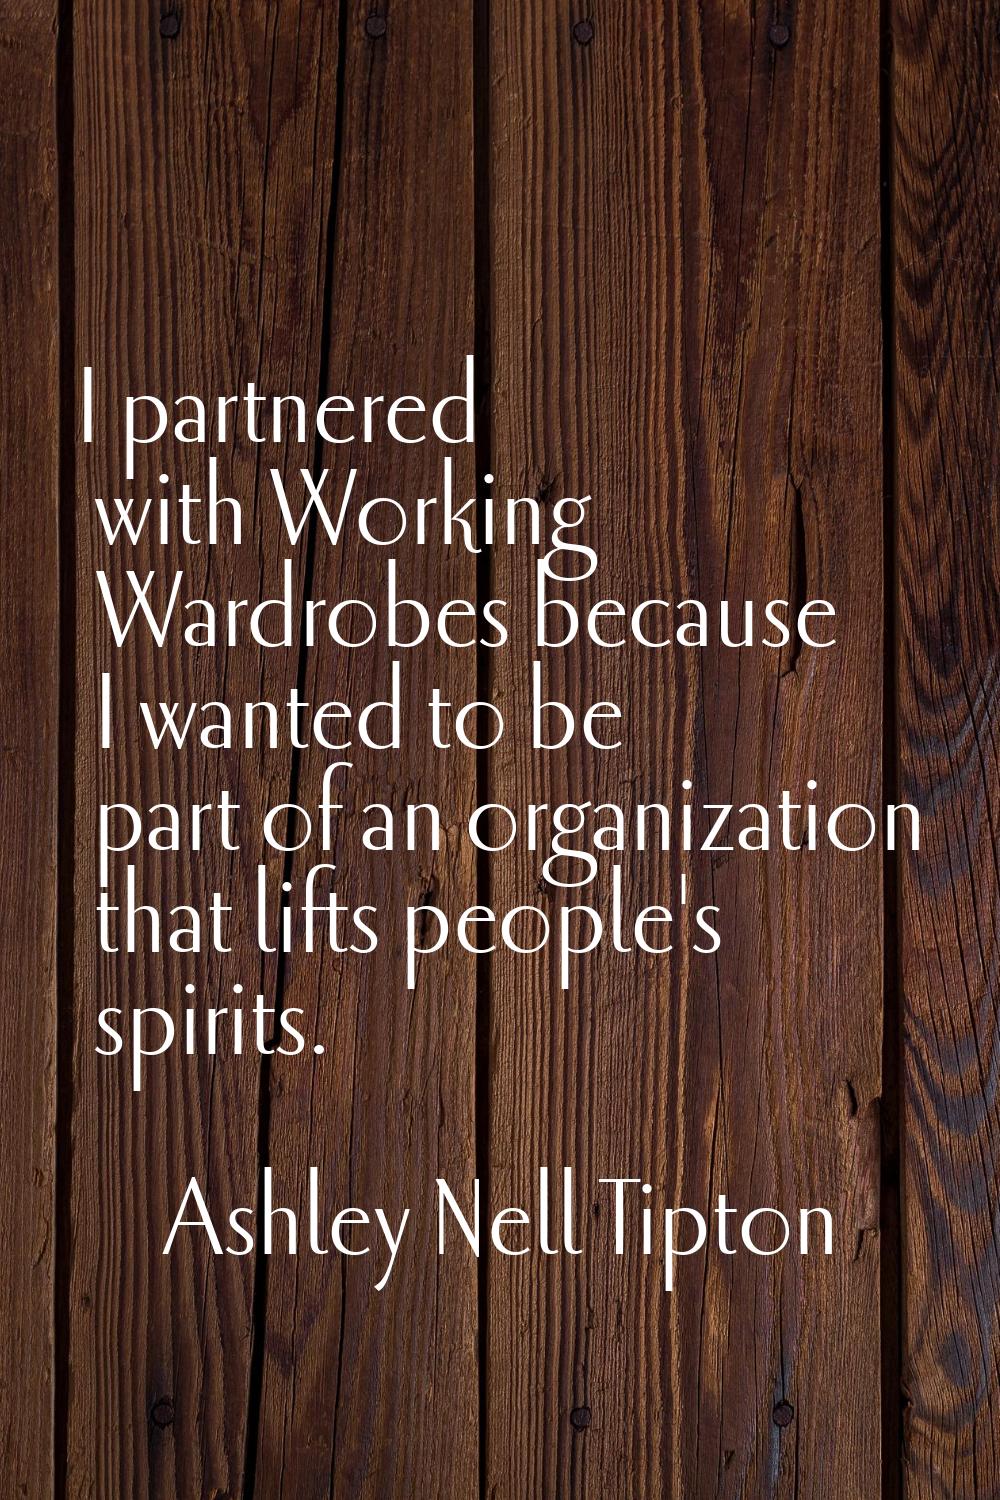 I partnered with Working Wardrobes because I wanted to be part of an organization that lifts people